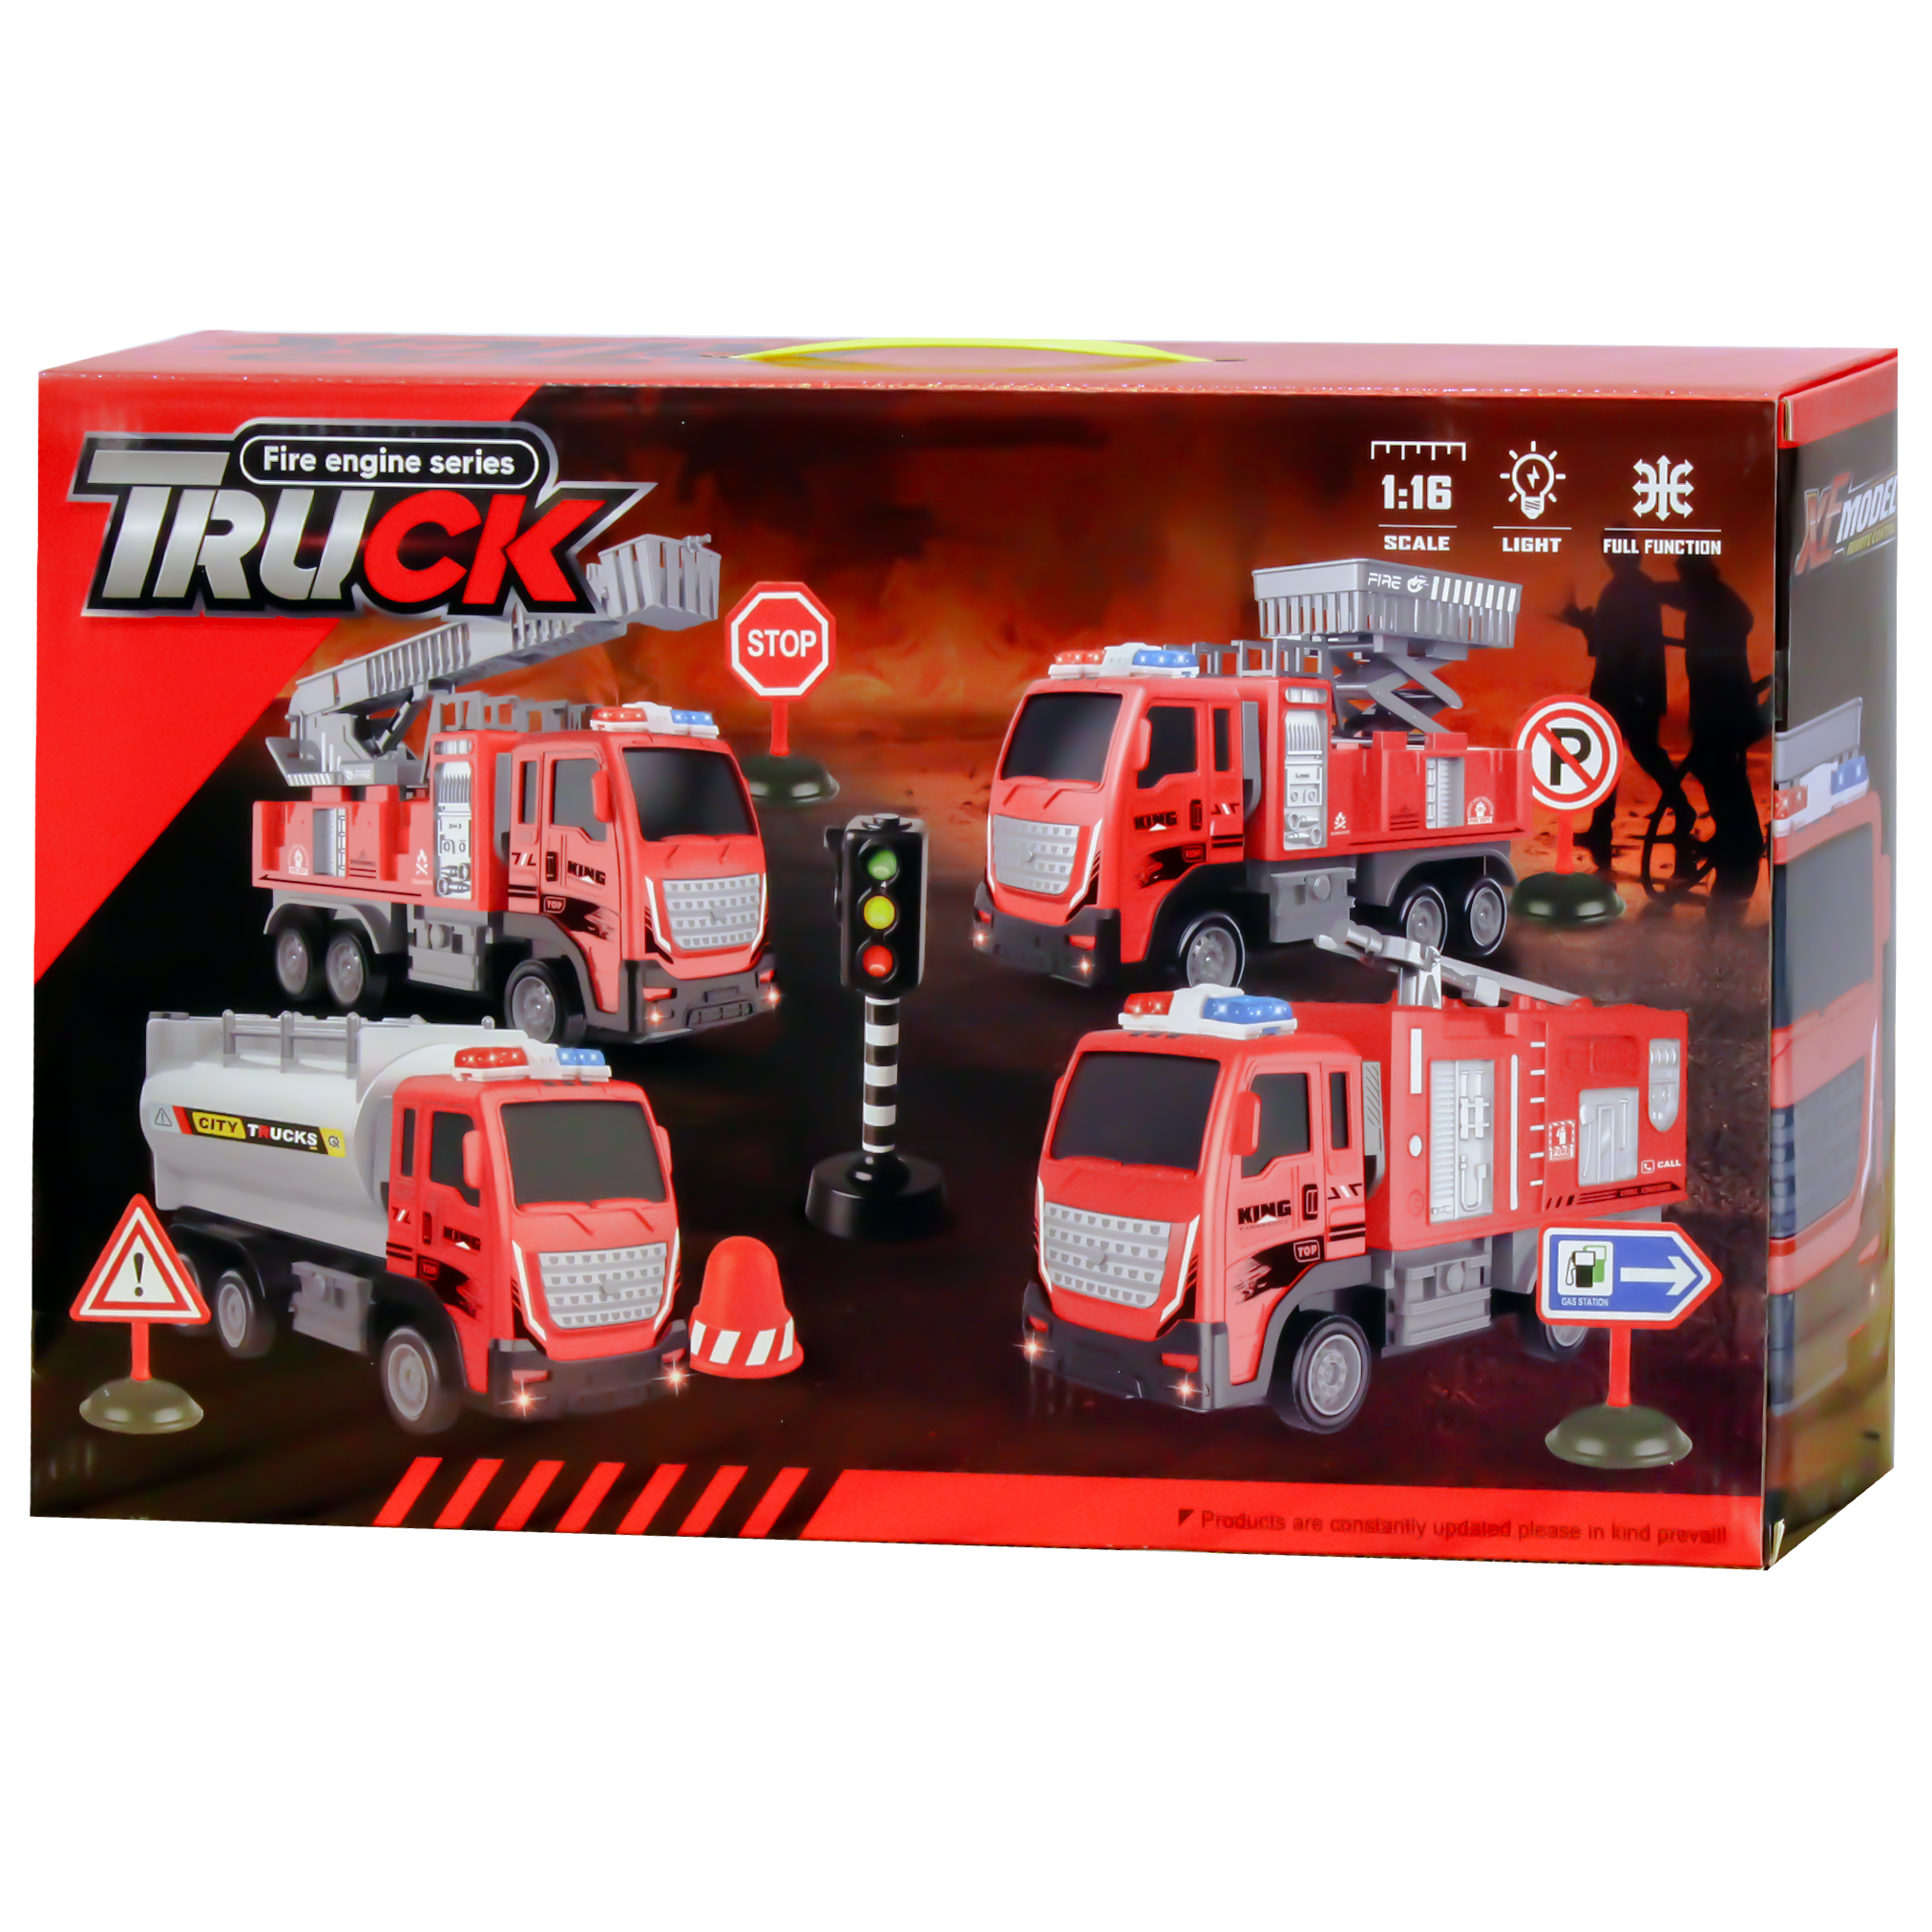 Fire Engine Series Truck 1:16 Scale With Remote Control 3+ Years